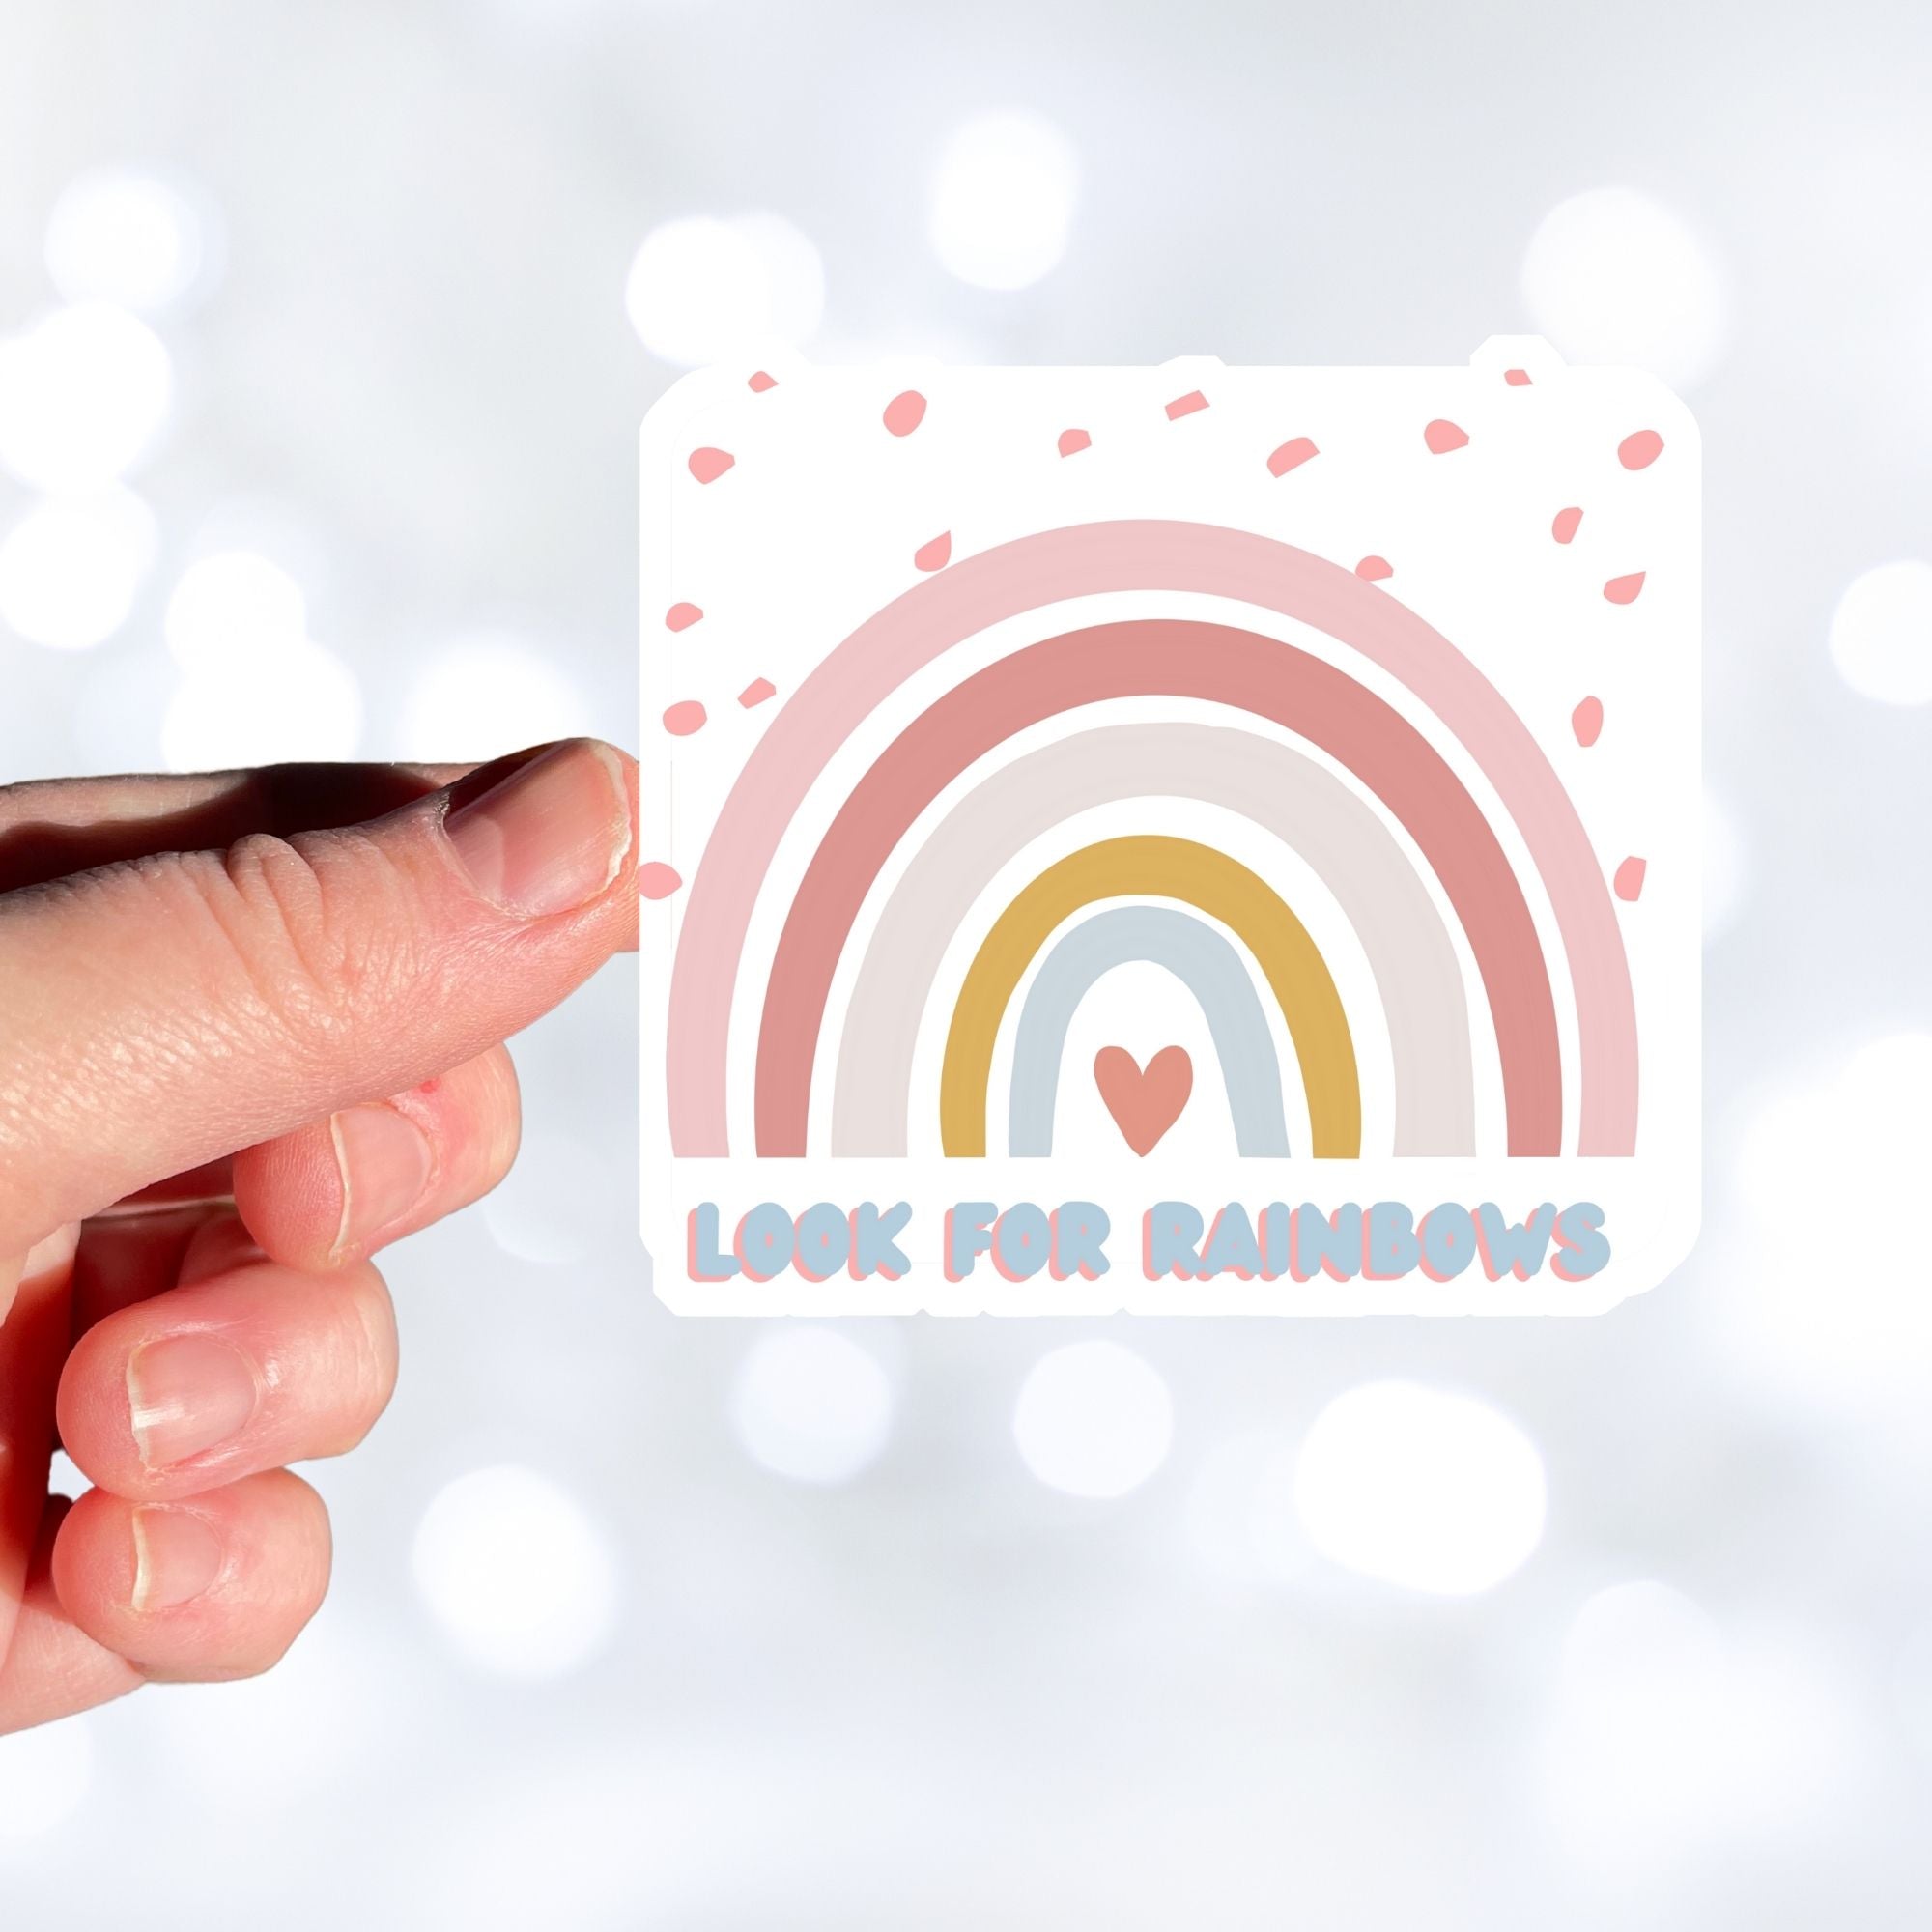 Look for Rainbows! This individual die-cut sticker features a pastel rainbow with "Look for Rainbows" written below. This image shows a hand holding the Look for Rainbows die-cut sticker.